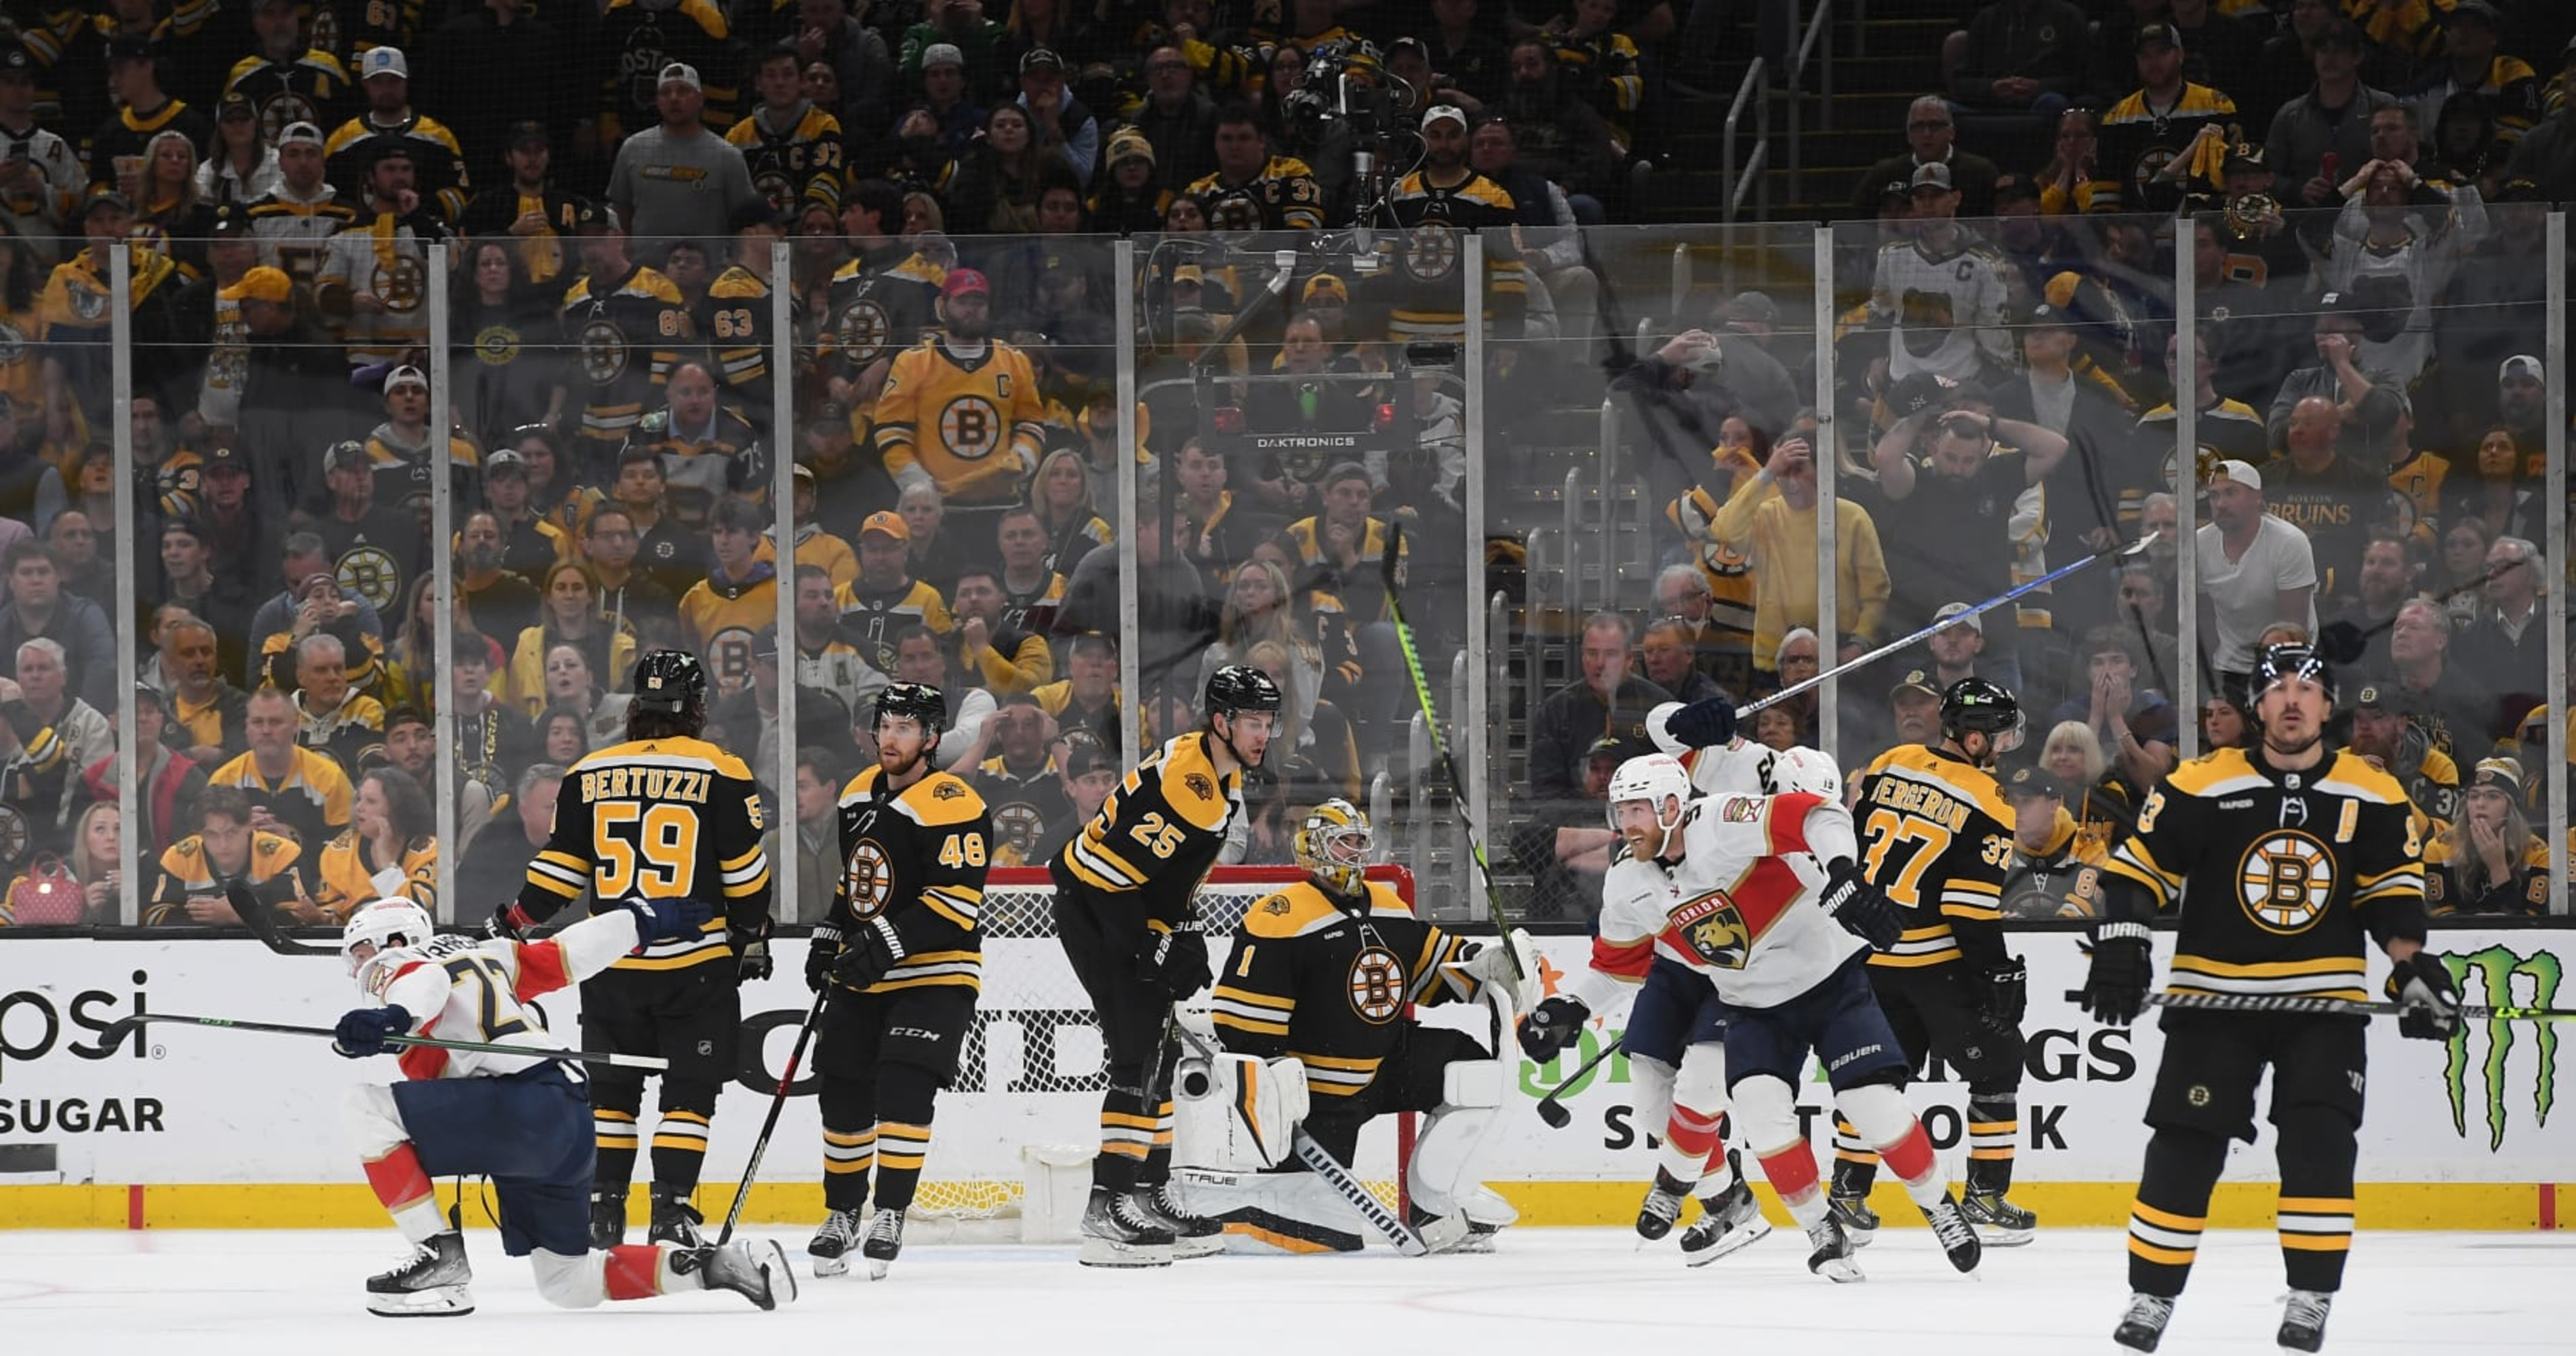 LIVE Bruins Beat: Why Bruins COLLAPSED vs Panthers in Round 1